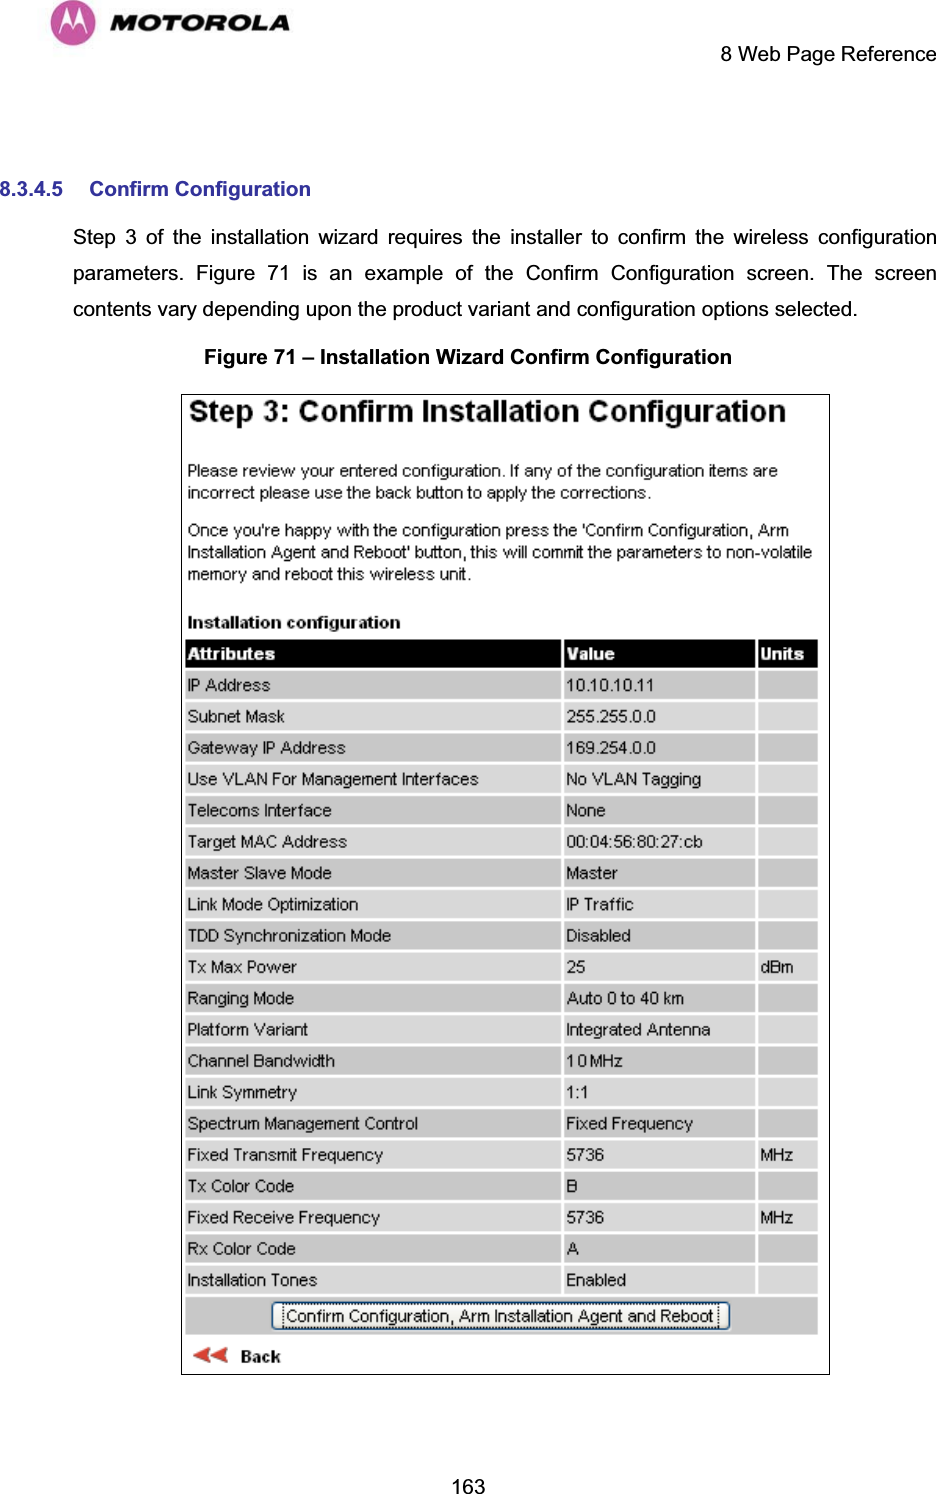     8 Web Page Reference  163 8.3.4.5 Confirm Configuration Step 3 of the installation wizard requires the installer to confirm the wireless configuration parameters. Figure 71 is an example of the Confirm Configuration screen. The screen contents vary depending upon the product variant and configuration options selected. Figure 71 – Installation Wizard Confirm Configuration  